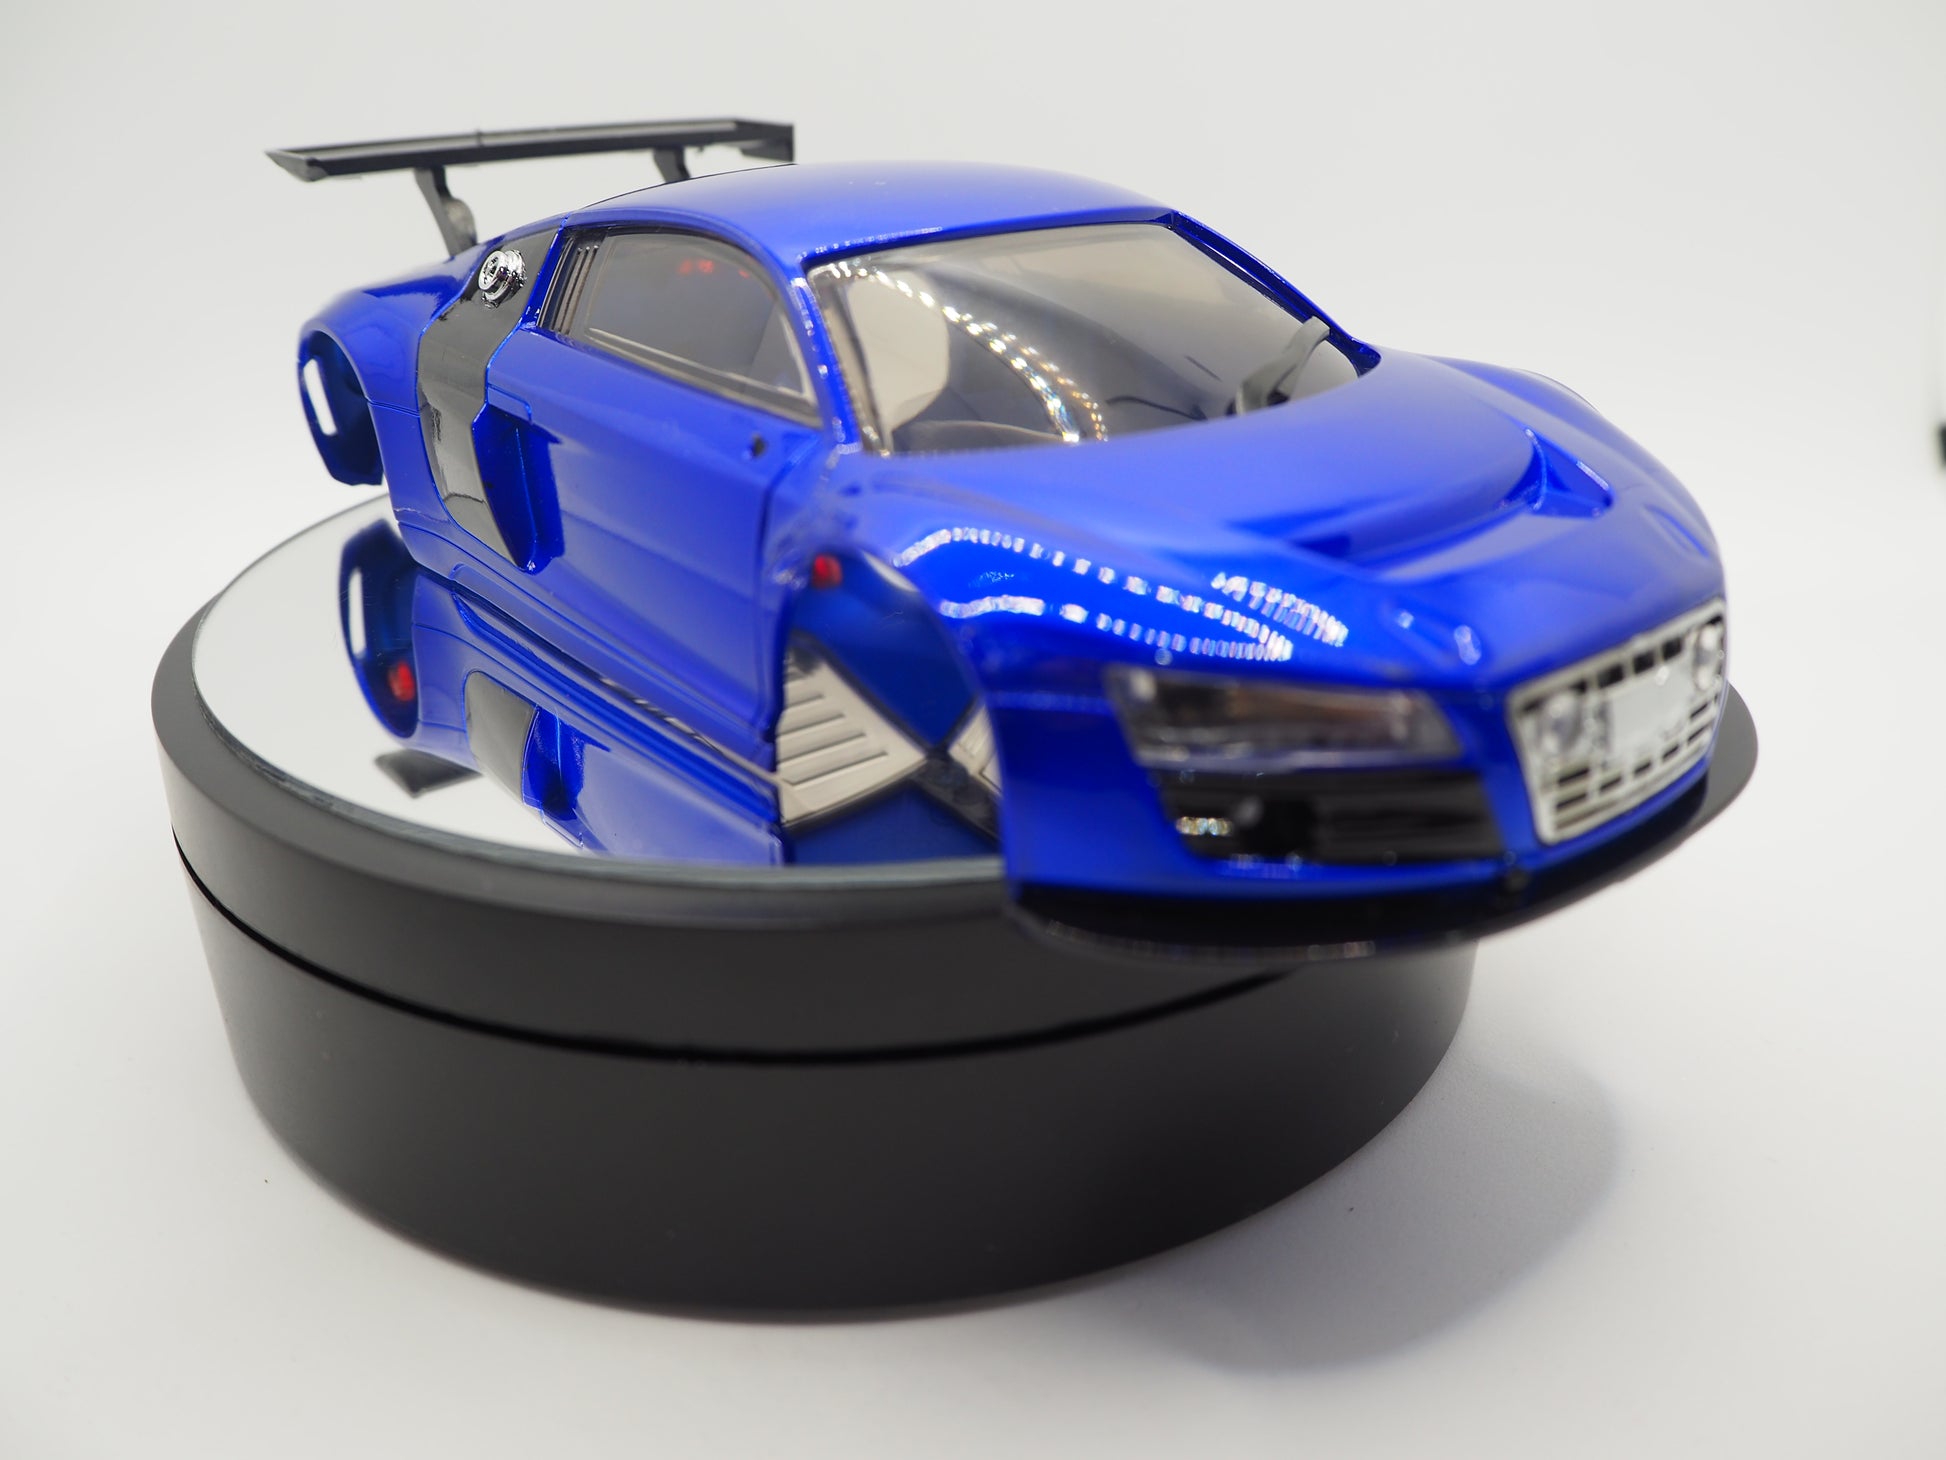 RC car AUDI R8 gets unboxed, tuned and tested! Kyosho Mini-Z! 